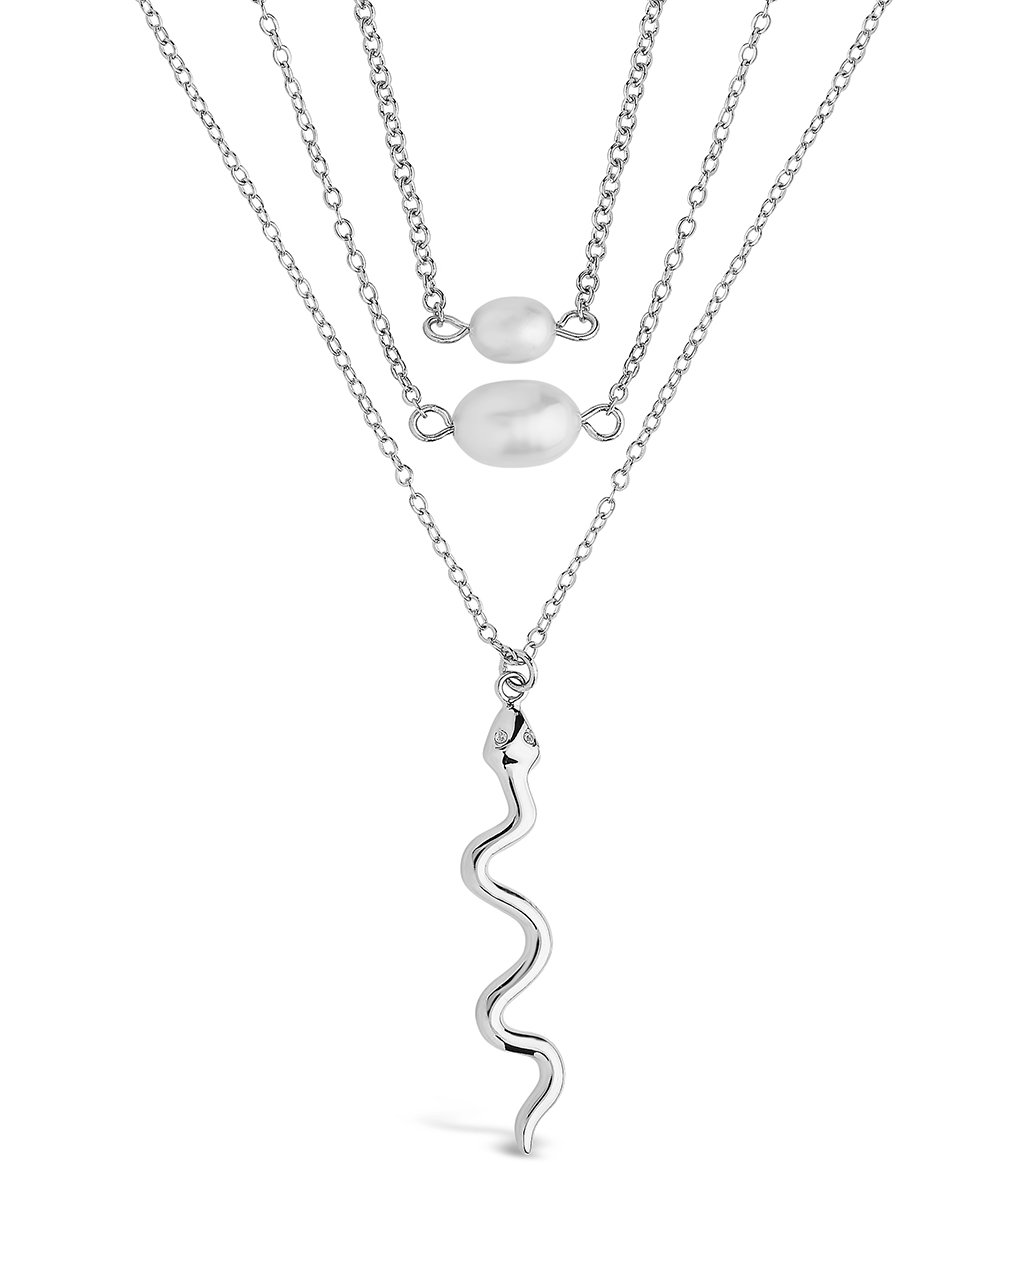 Wriggling Snake & Pearl Layered Necklace Necklace Sterling Forever Silver